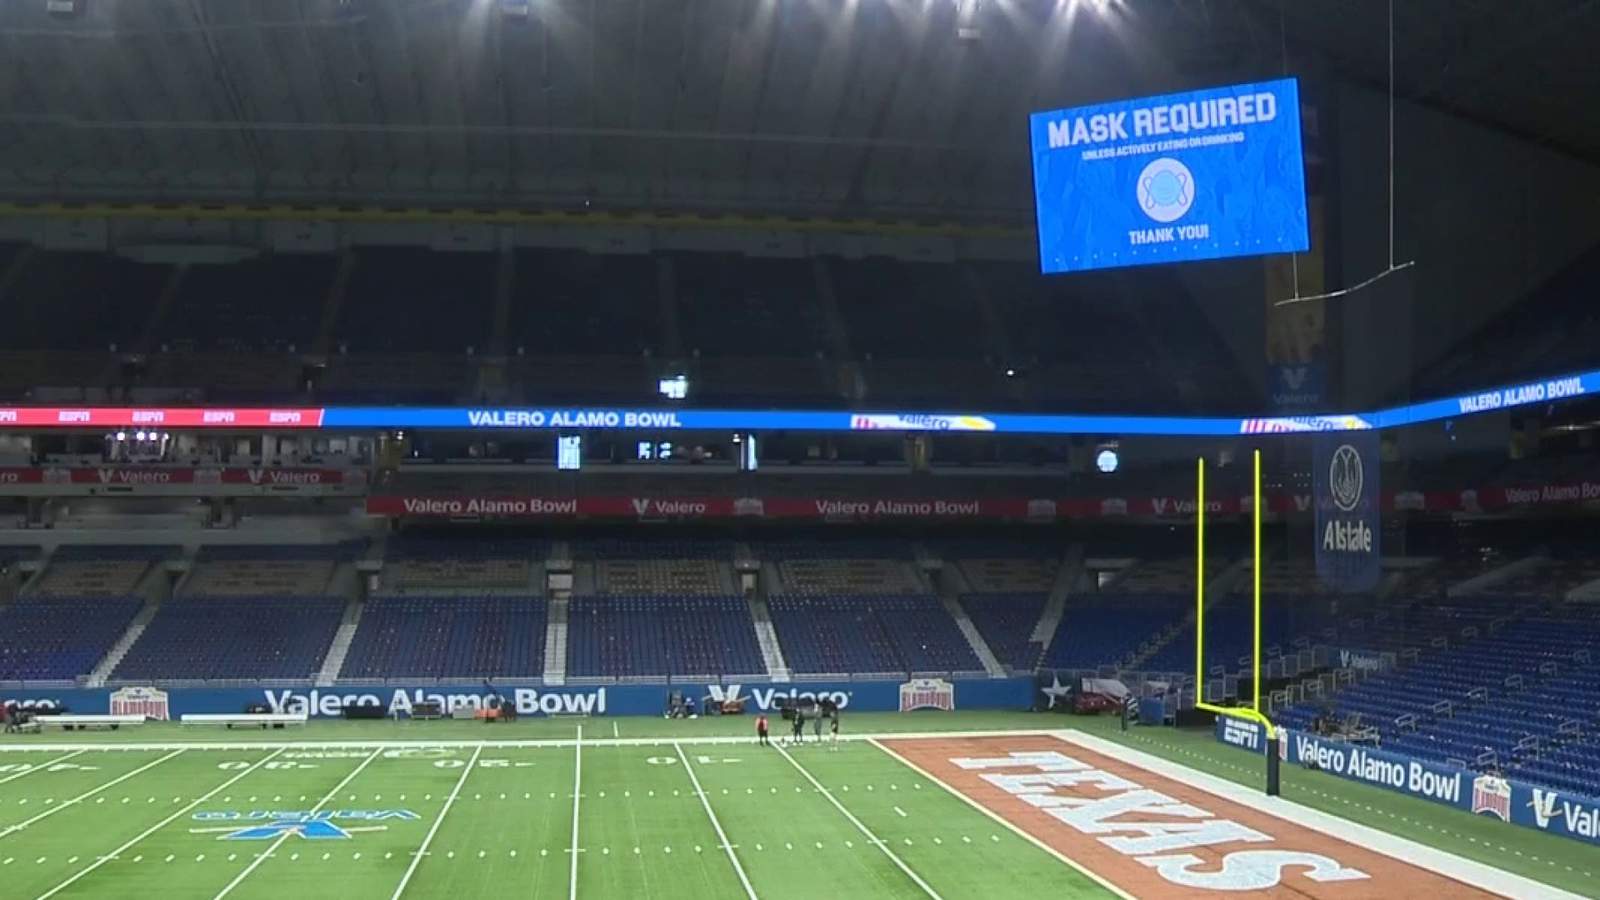 17 people cited, warned or kicked out of Alamo Bowl for ‘repeated refusal’ to wear face masks, city says